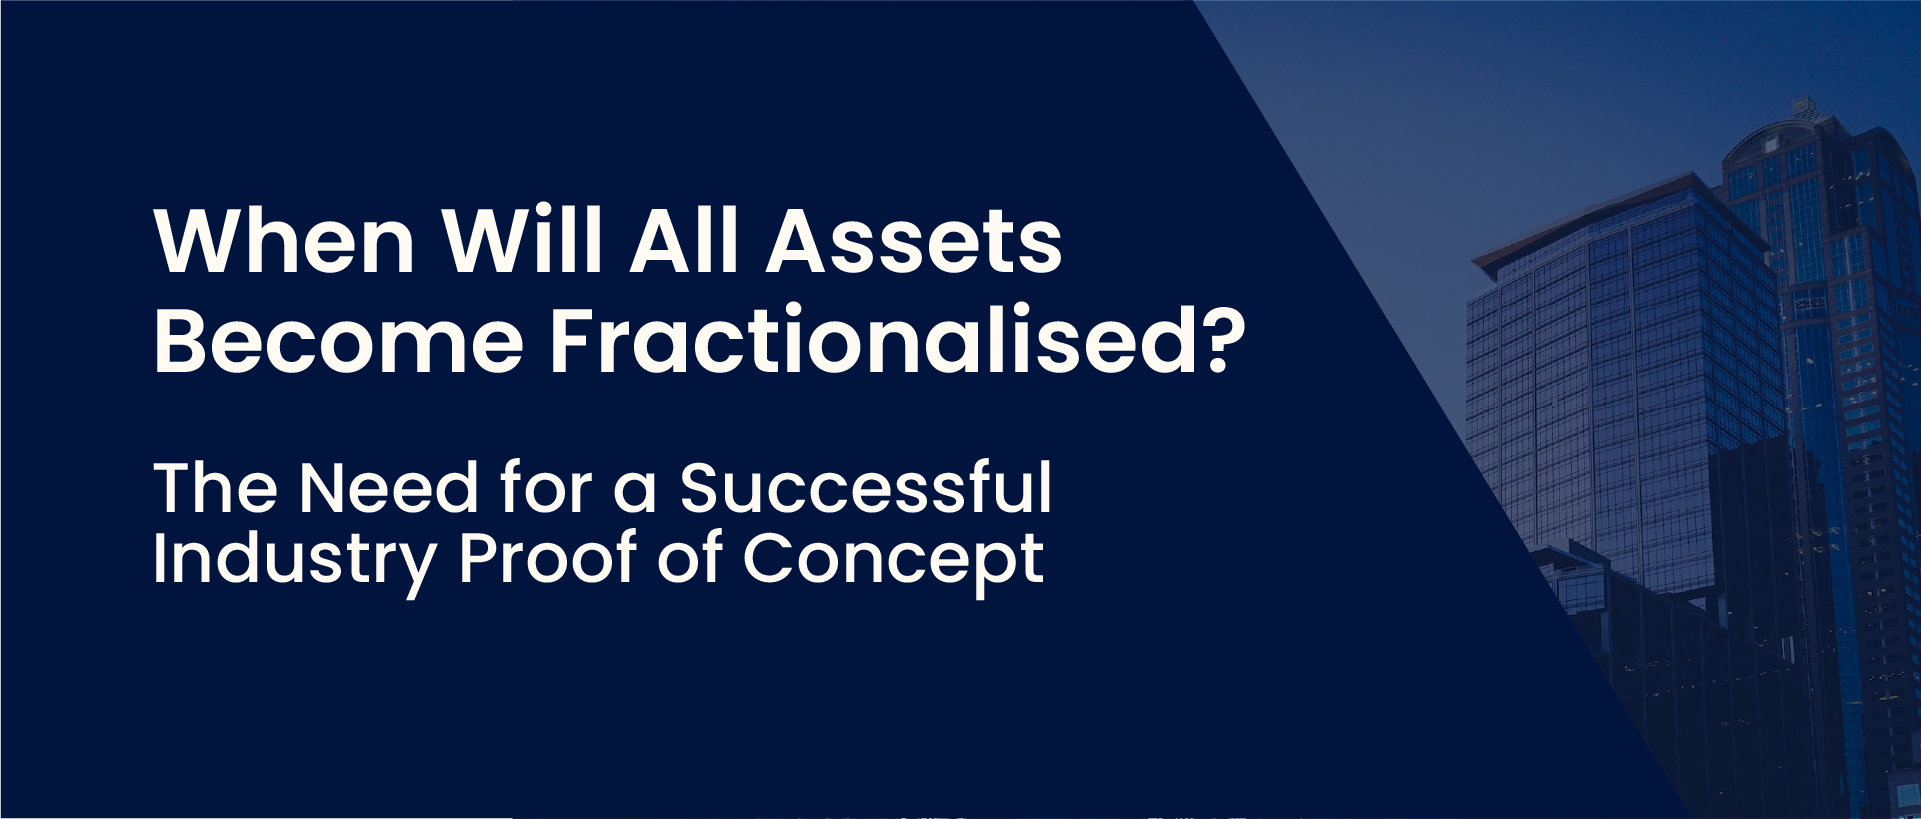 When Will All Assets Become Fractionalized? The Need for a Successful Industry Proof of Concept